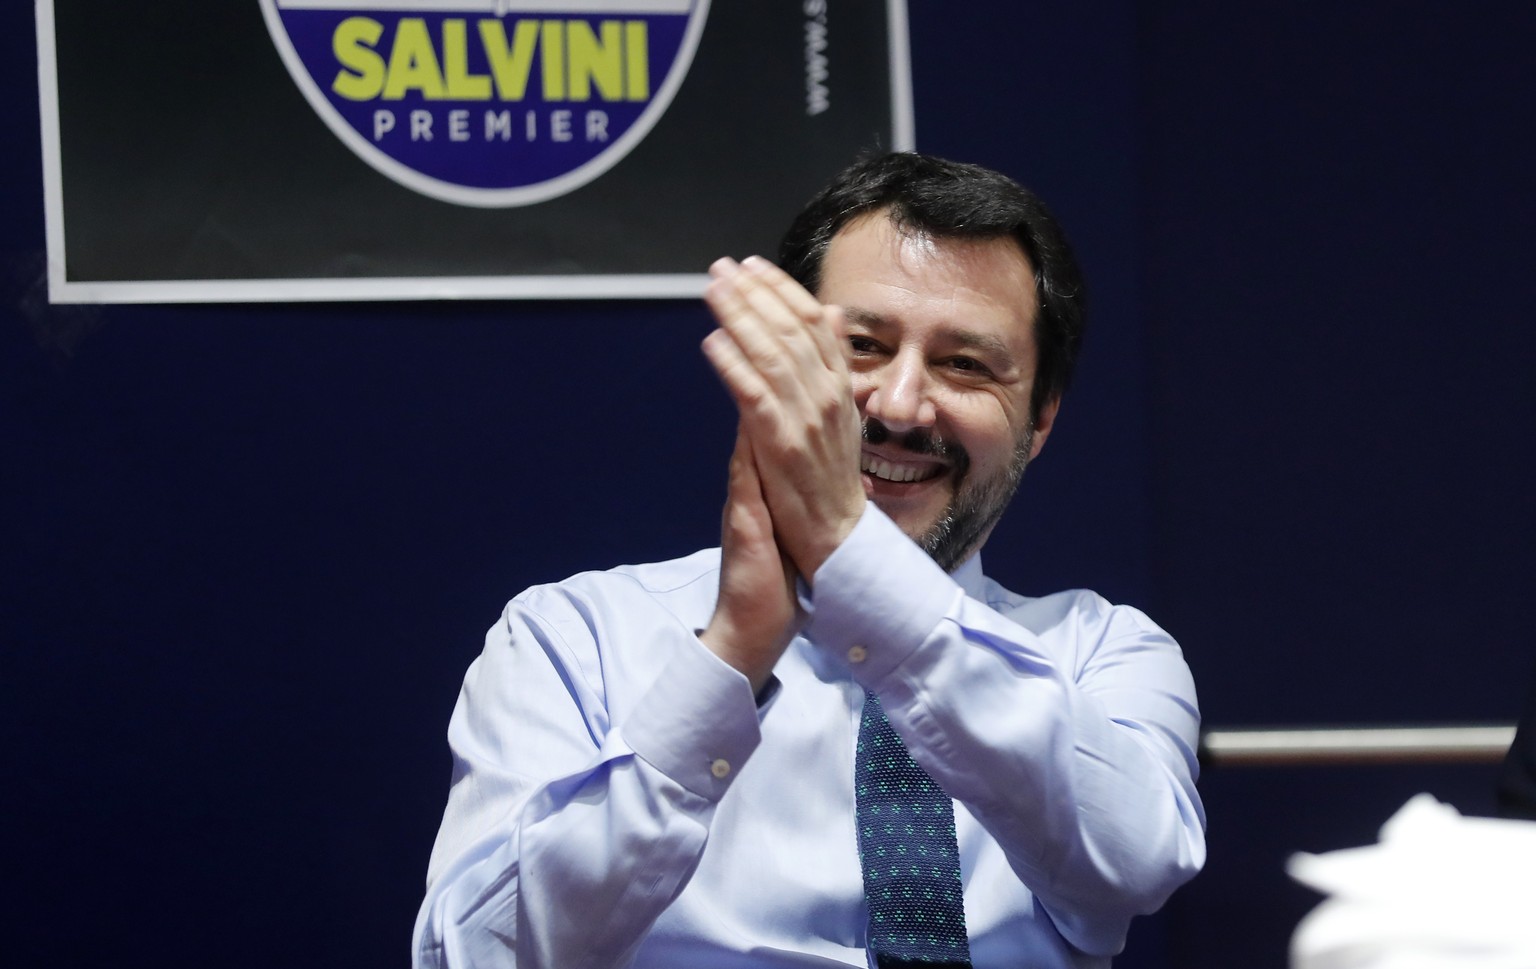 Leader of The League party Matteo Salvini smiles prior to an electoral rally in Milan, Italy, Friday, March 2, 2018. Italians will vote in general elections Sunday. (AP Photo/Antonio Calanni)